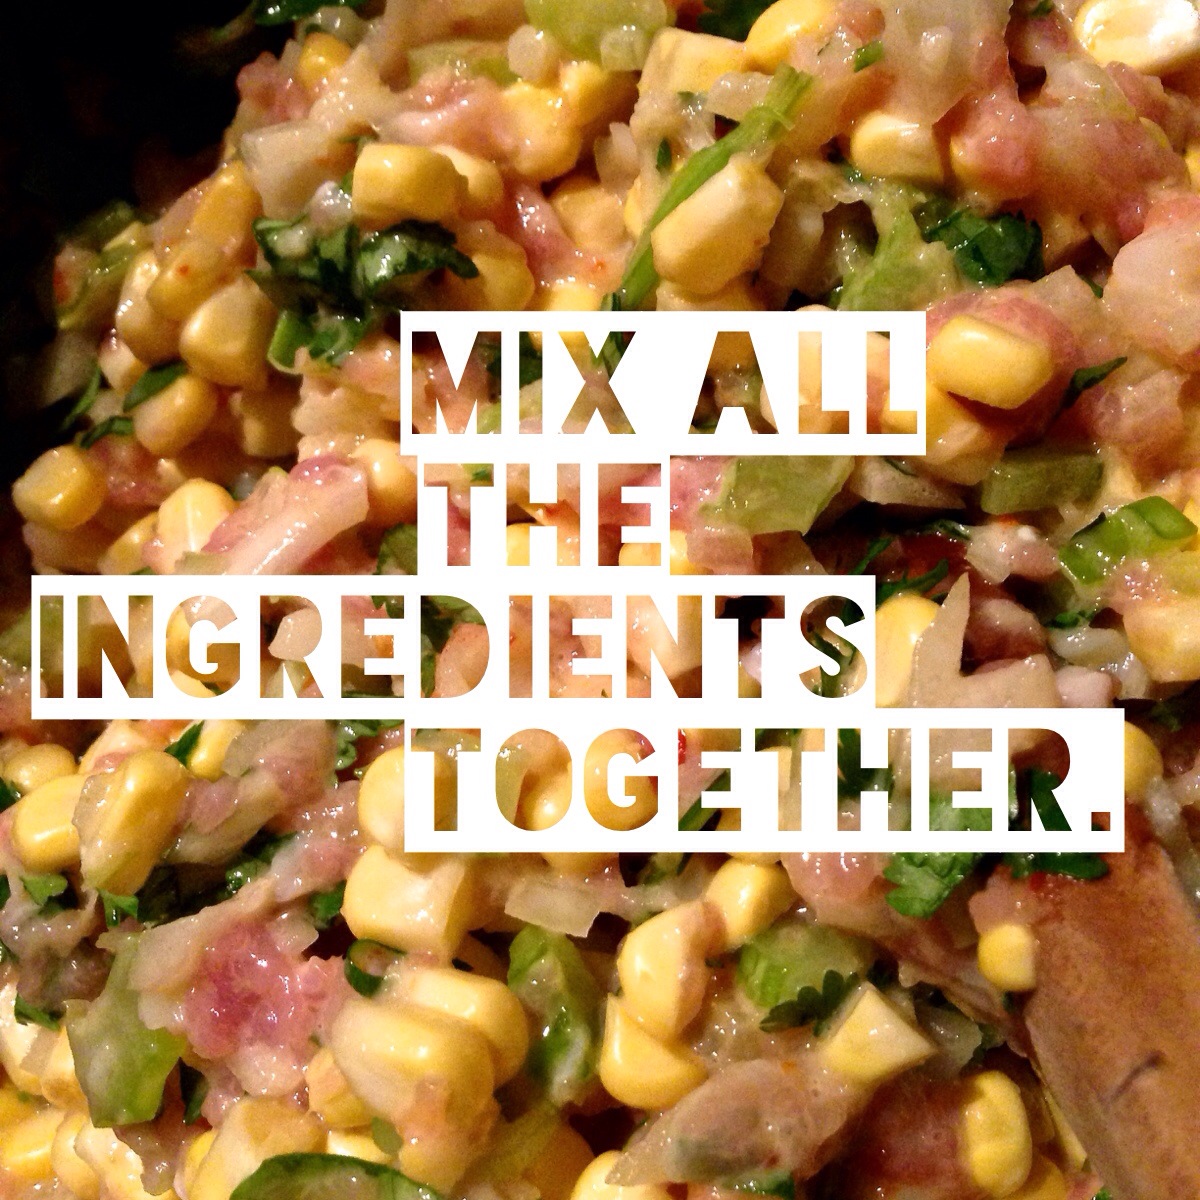 Corn Fritters Mix all ingredients together